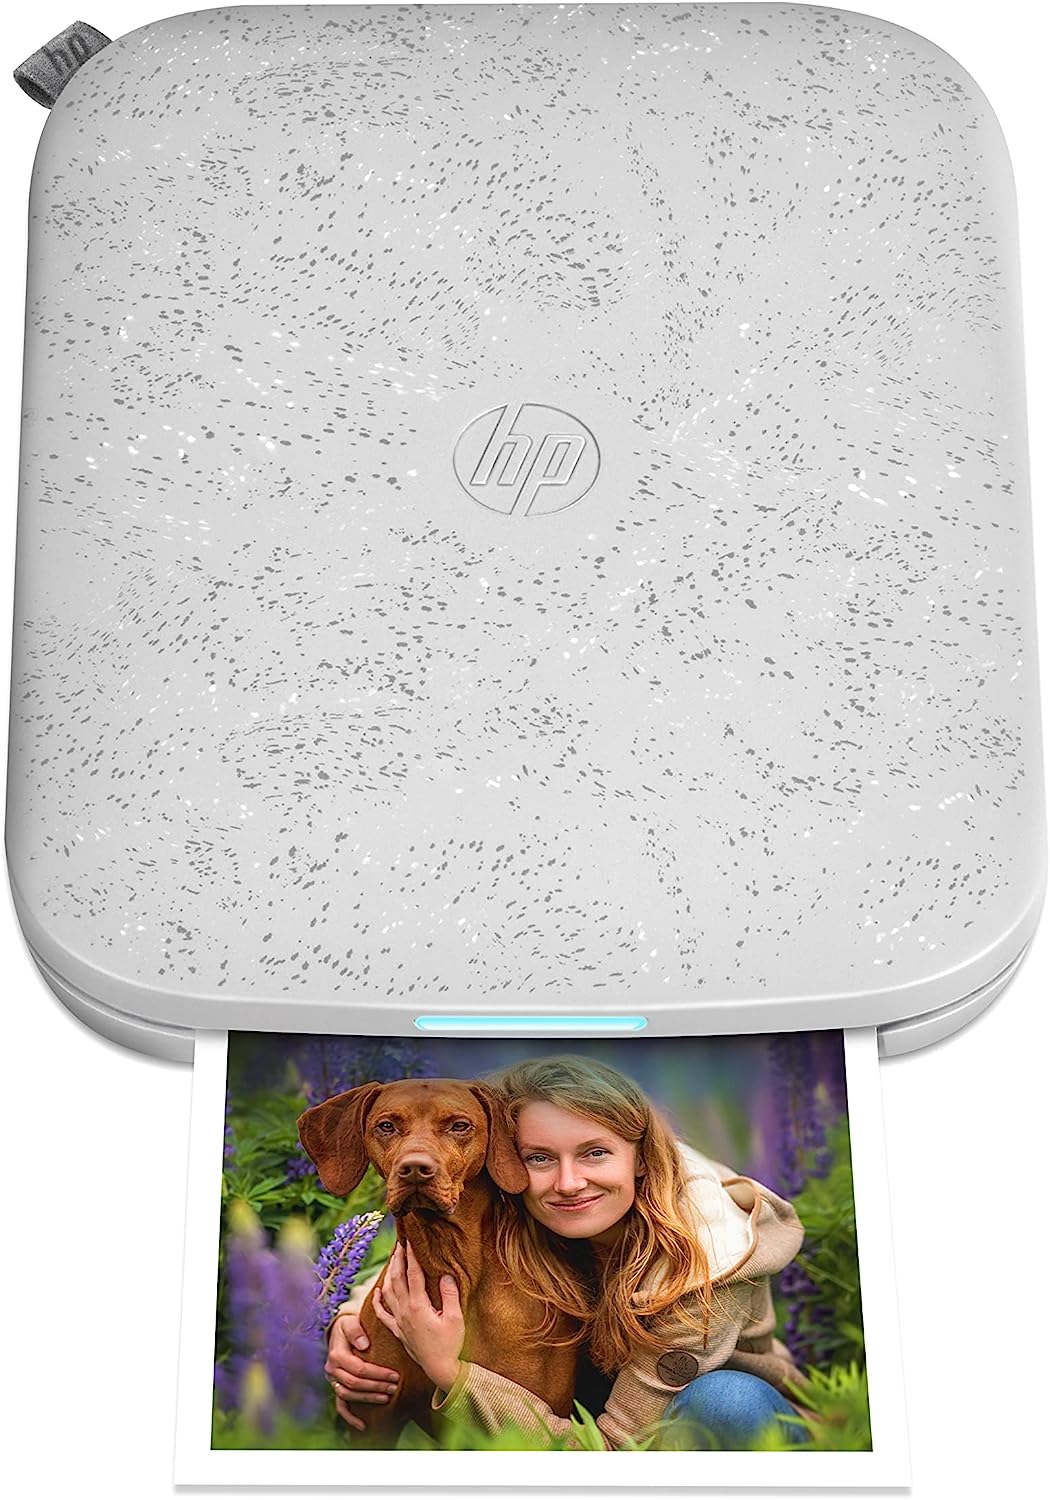 HP Sprocket Instant Photo Printer, 3x4 Portable Printer for iOS & Android